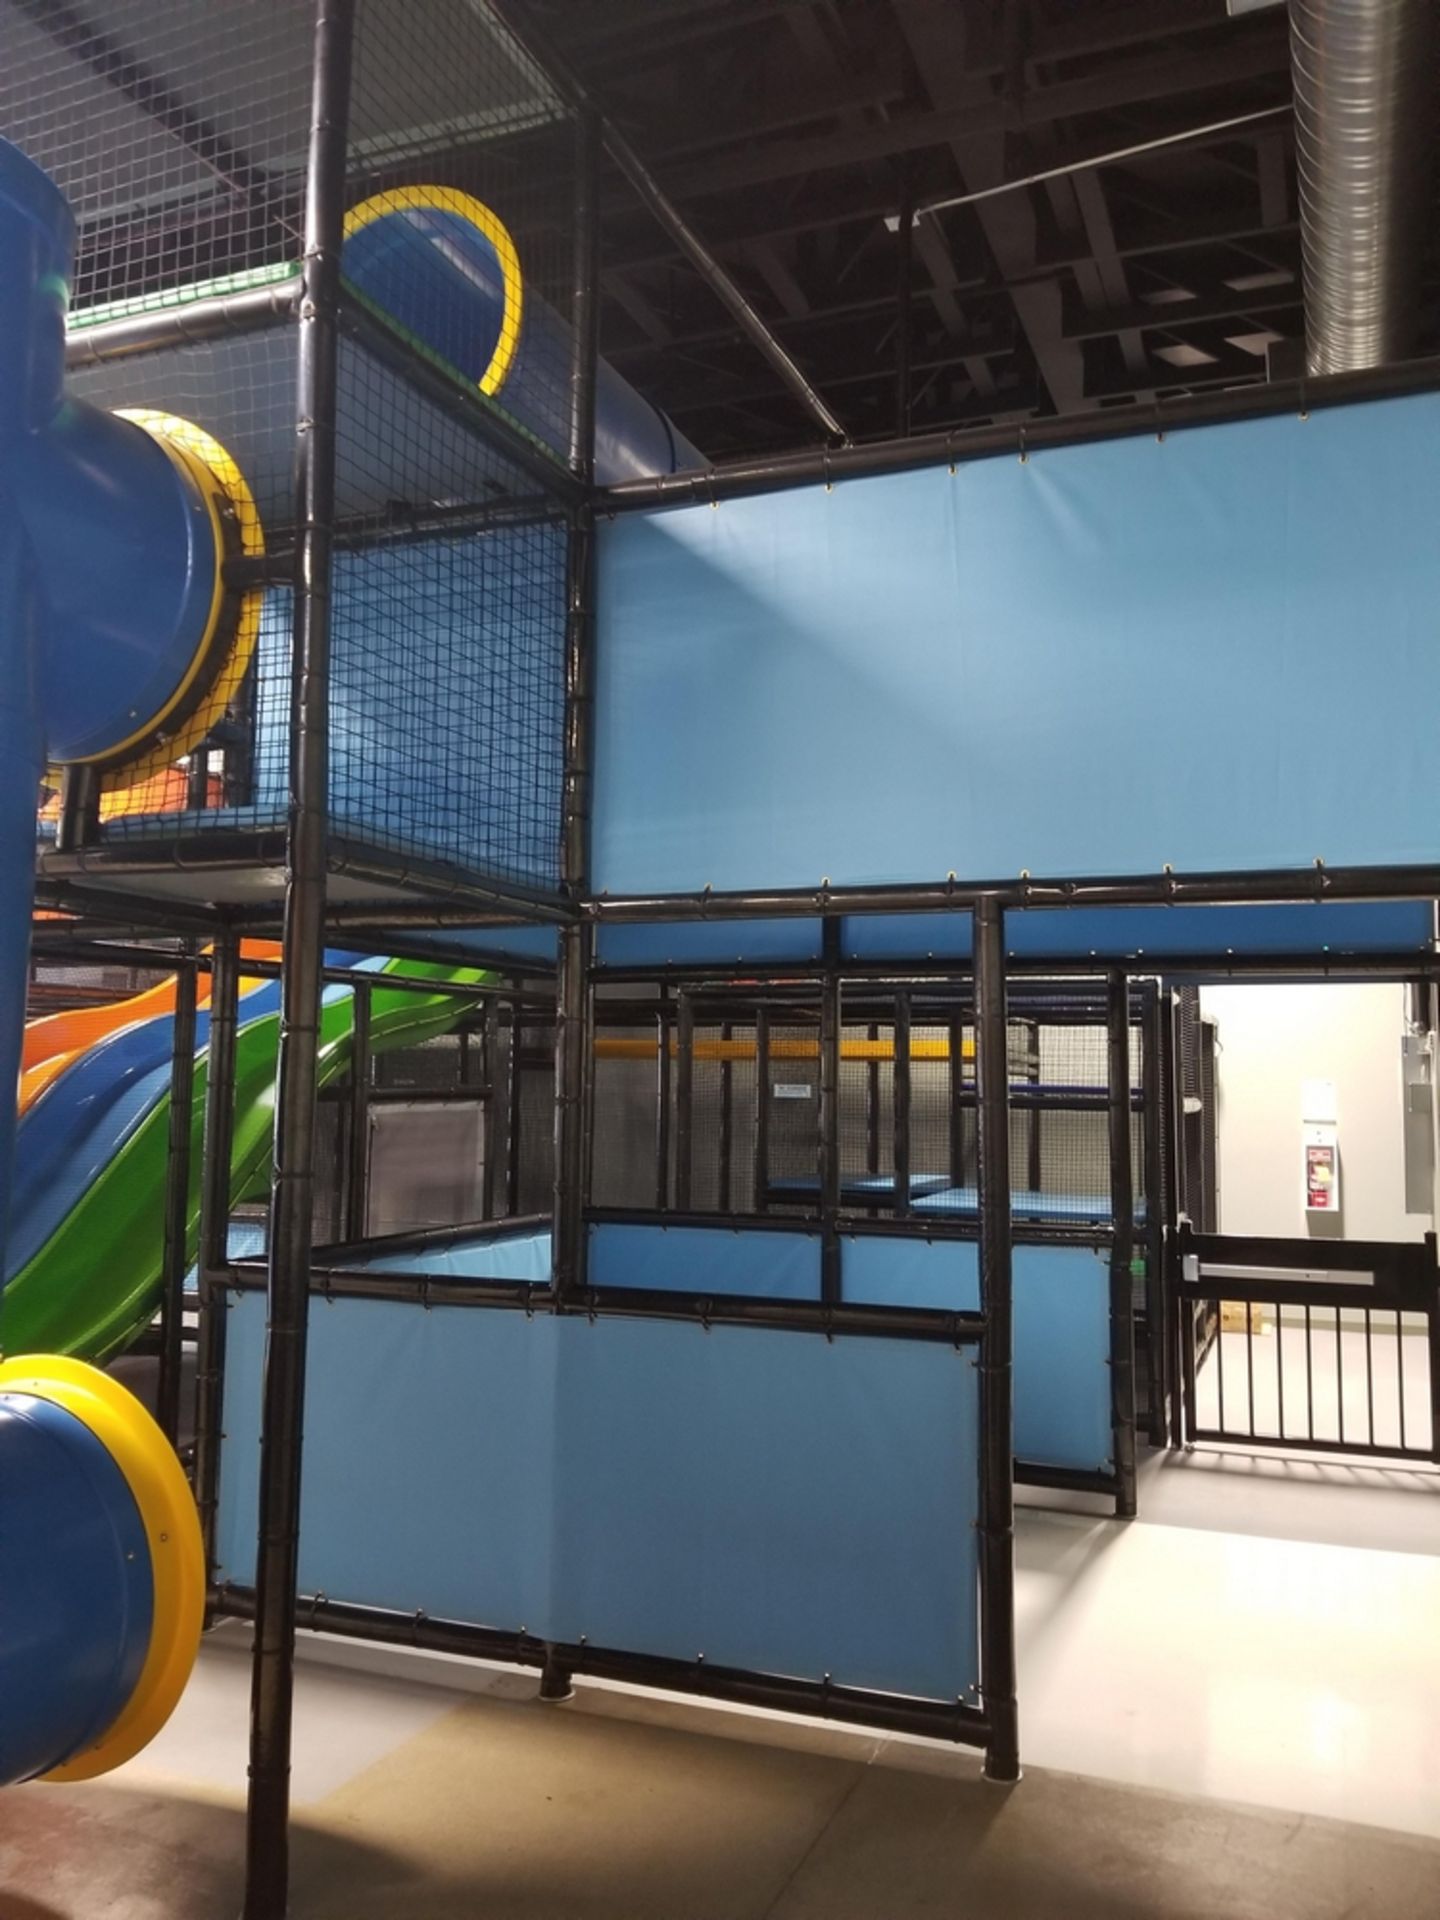 Kids Play Center with Climbing Wall, Slides, race track Fully Dismantled - Image 5 of 6